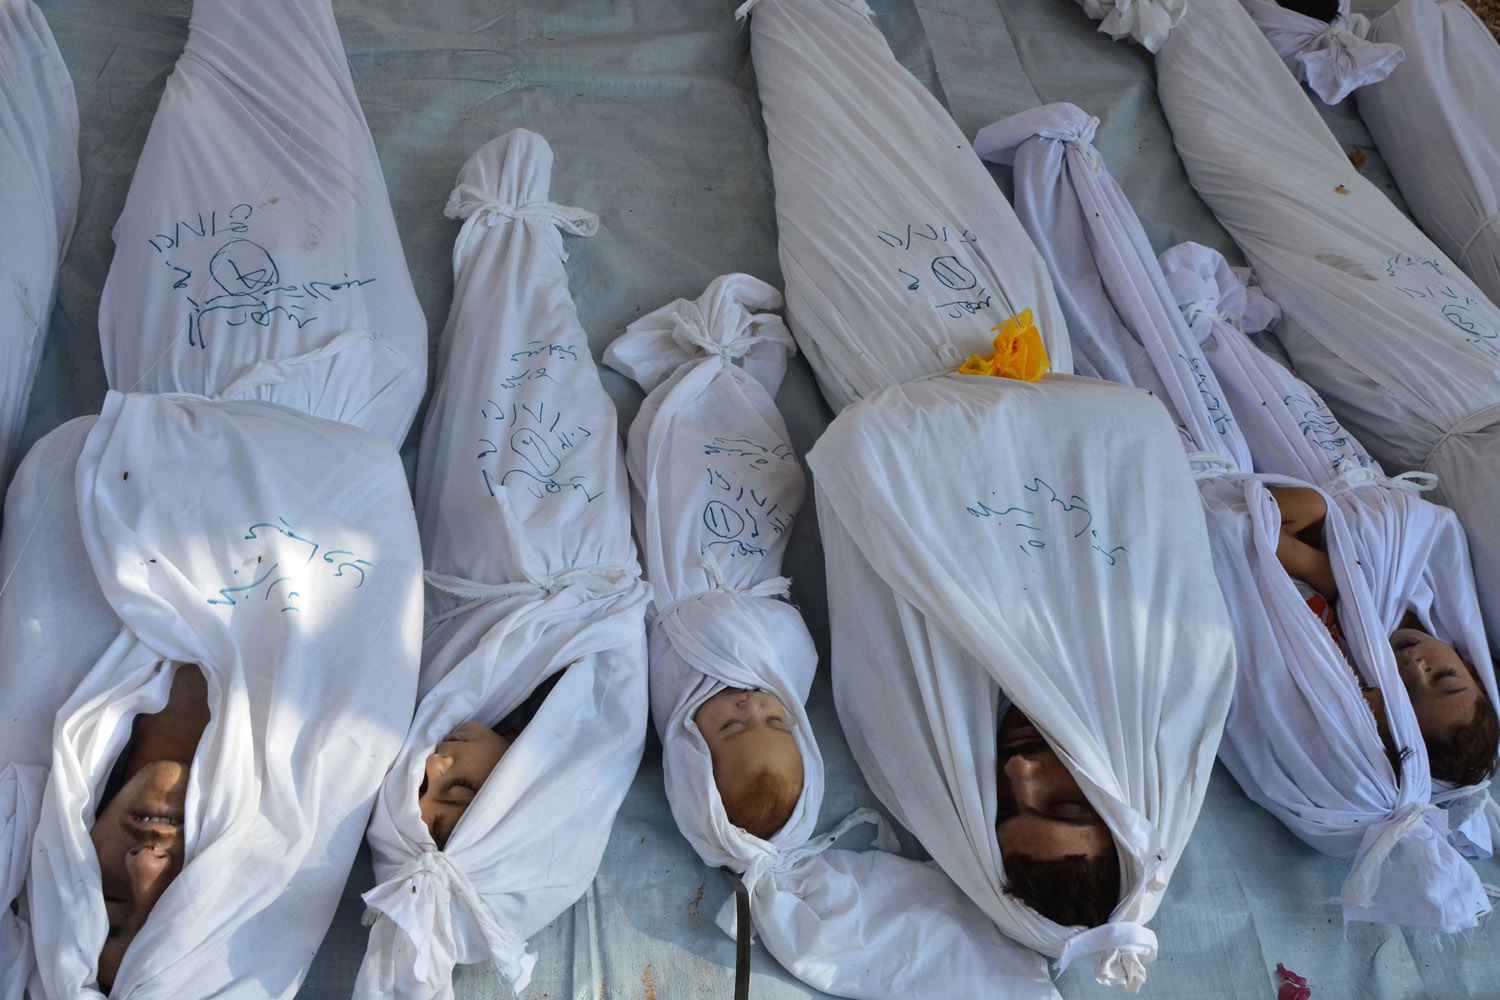 Bodies of people activists say were killed by nerve gas in the Ghouta region are seen in the Duma neighbourhood of Damascus